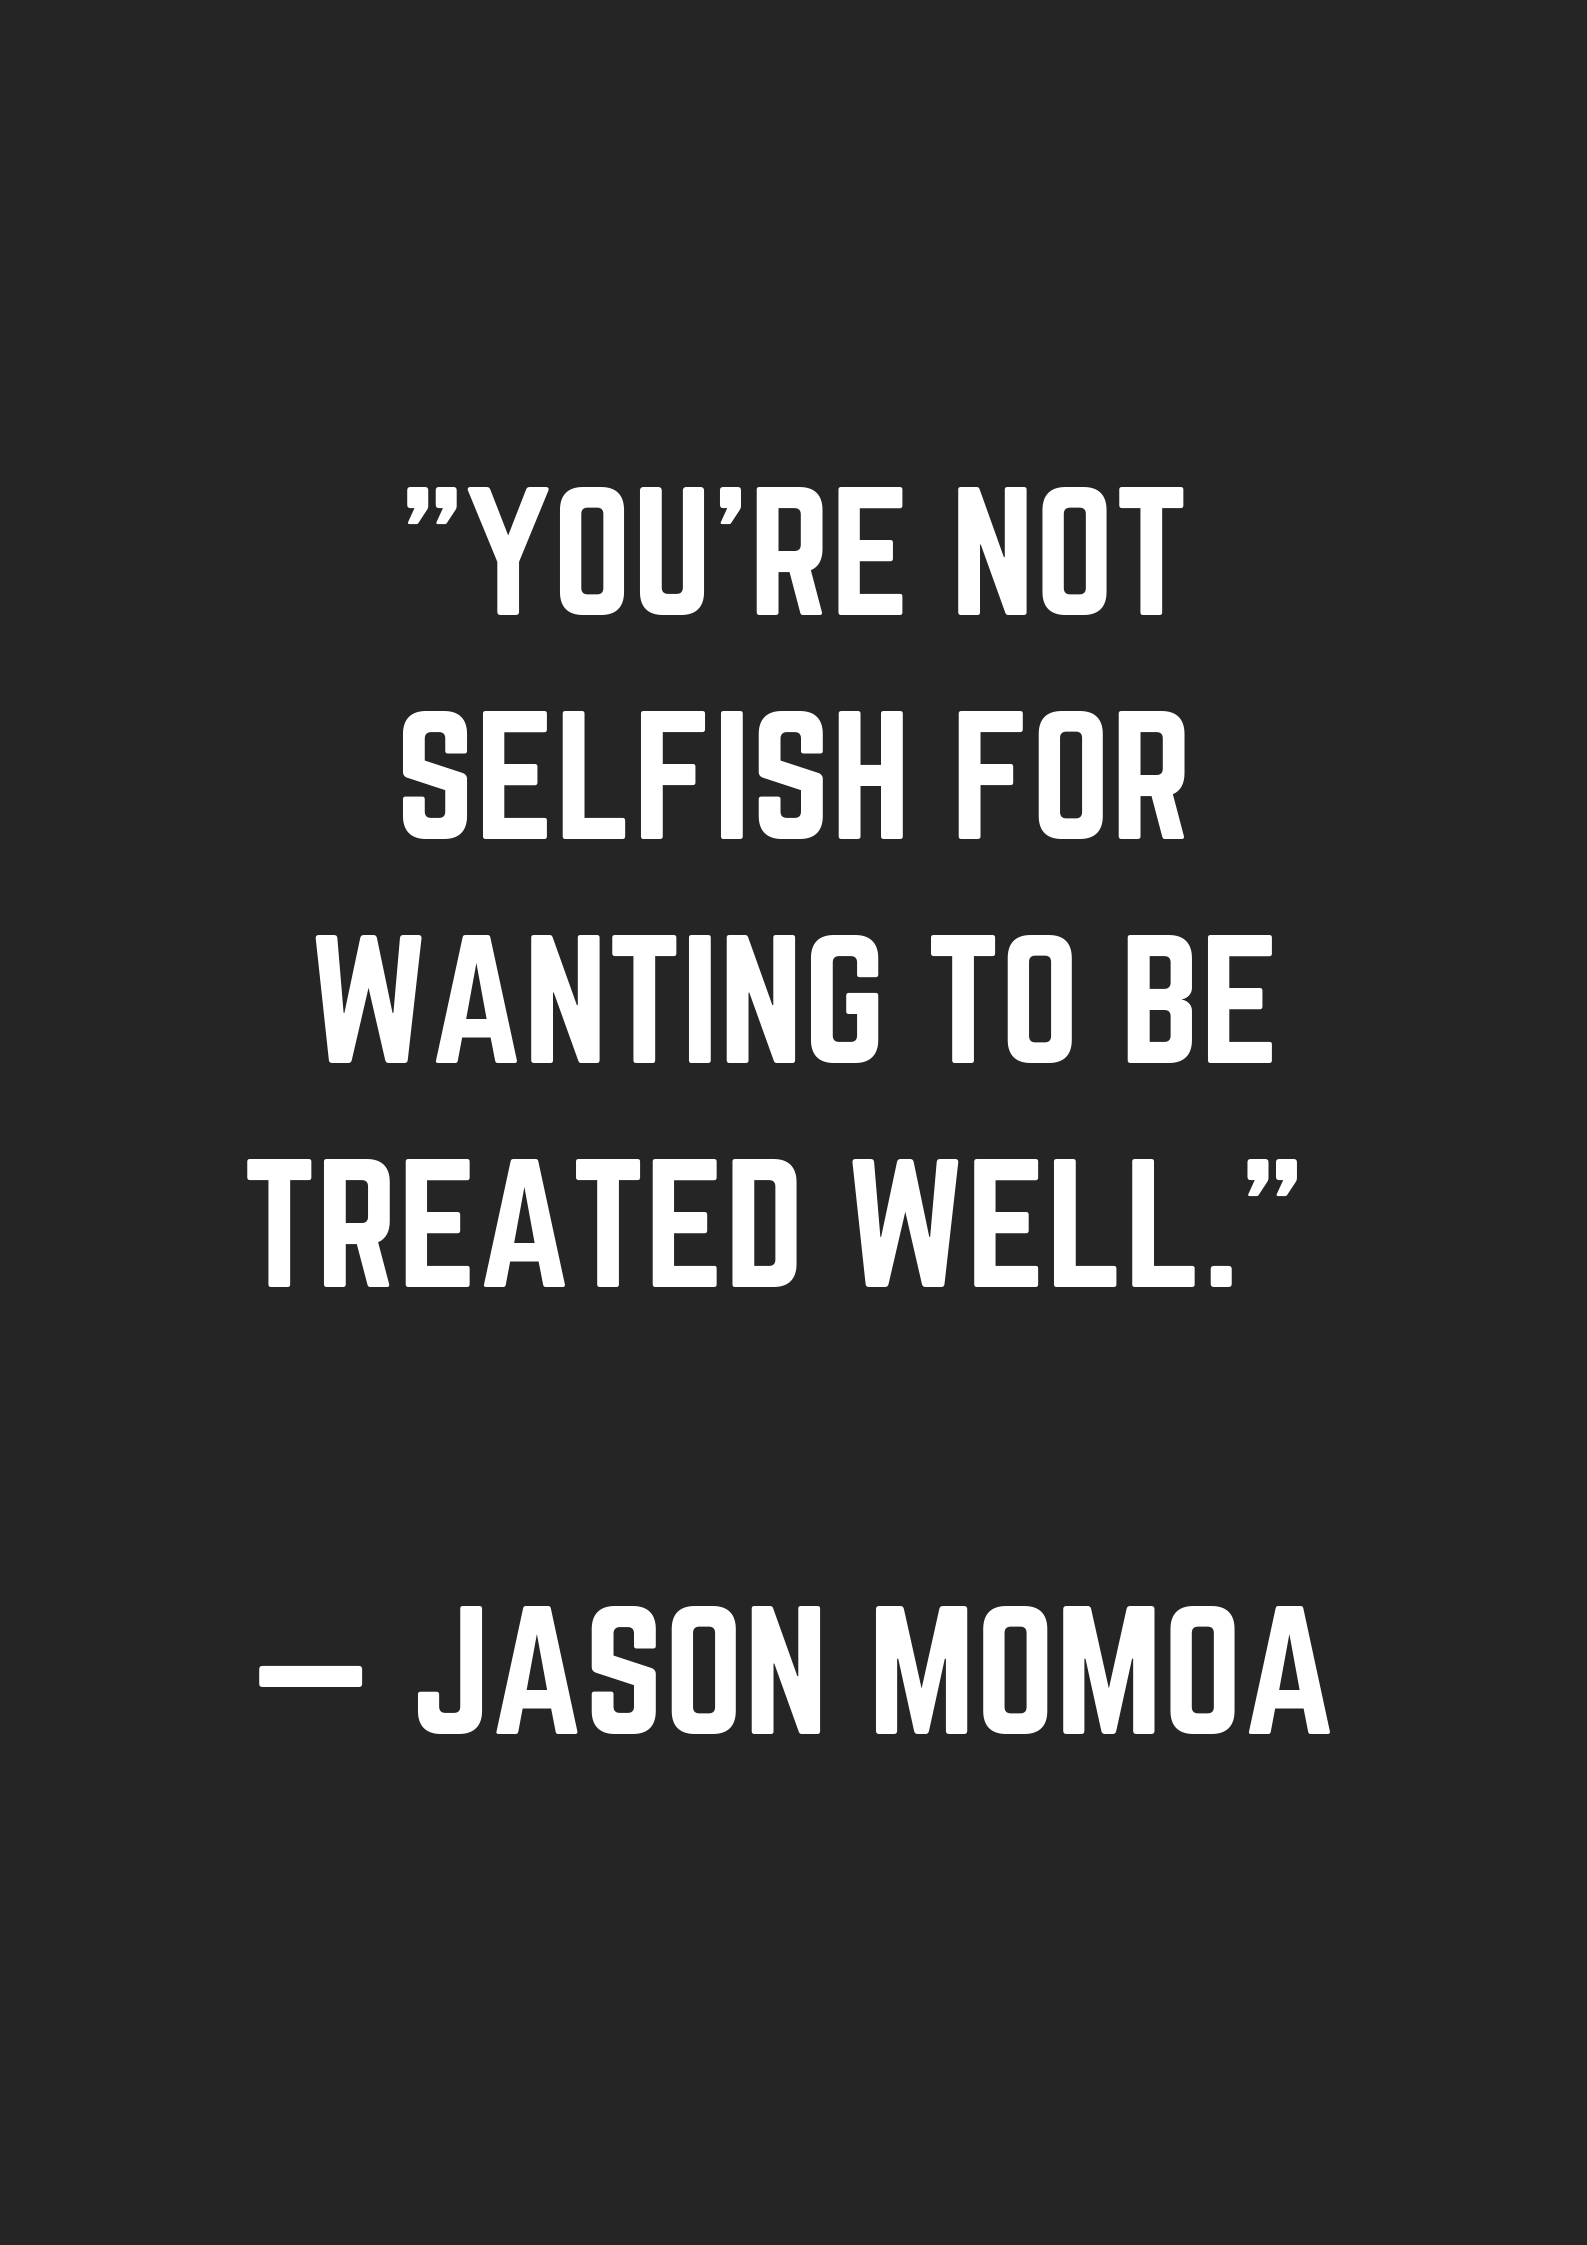 25 Powerful Jason Momoa Quotes about Love